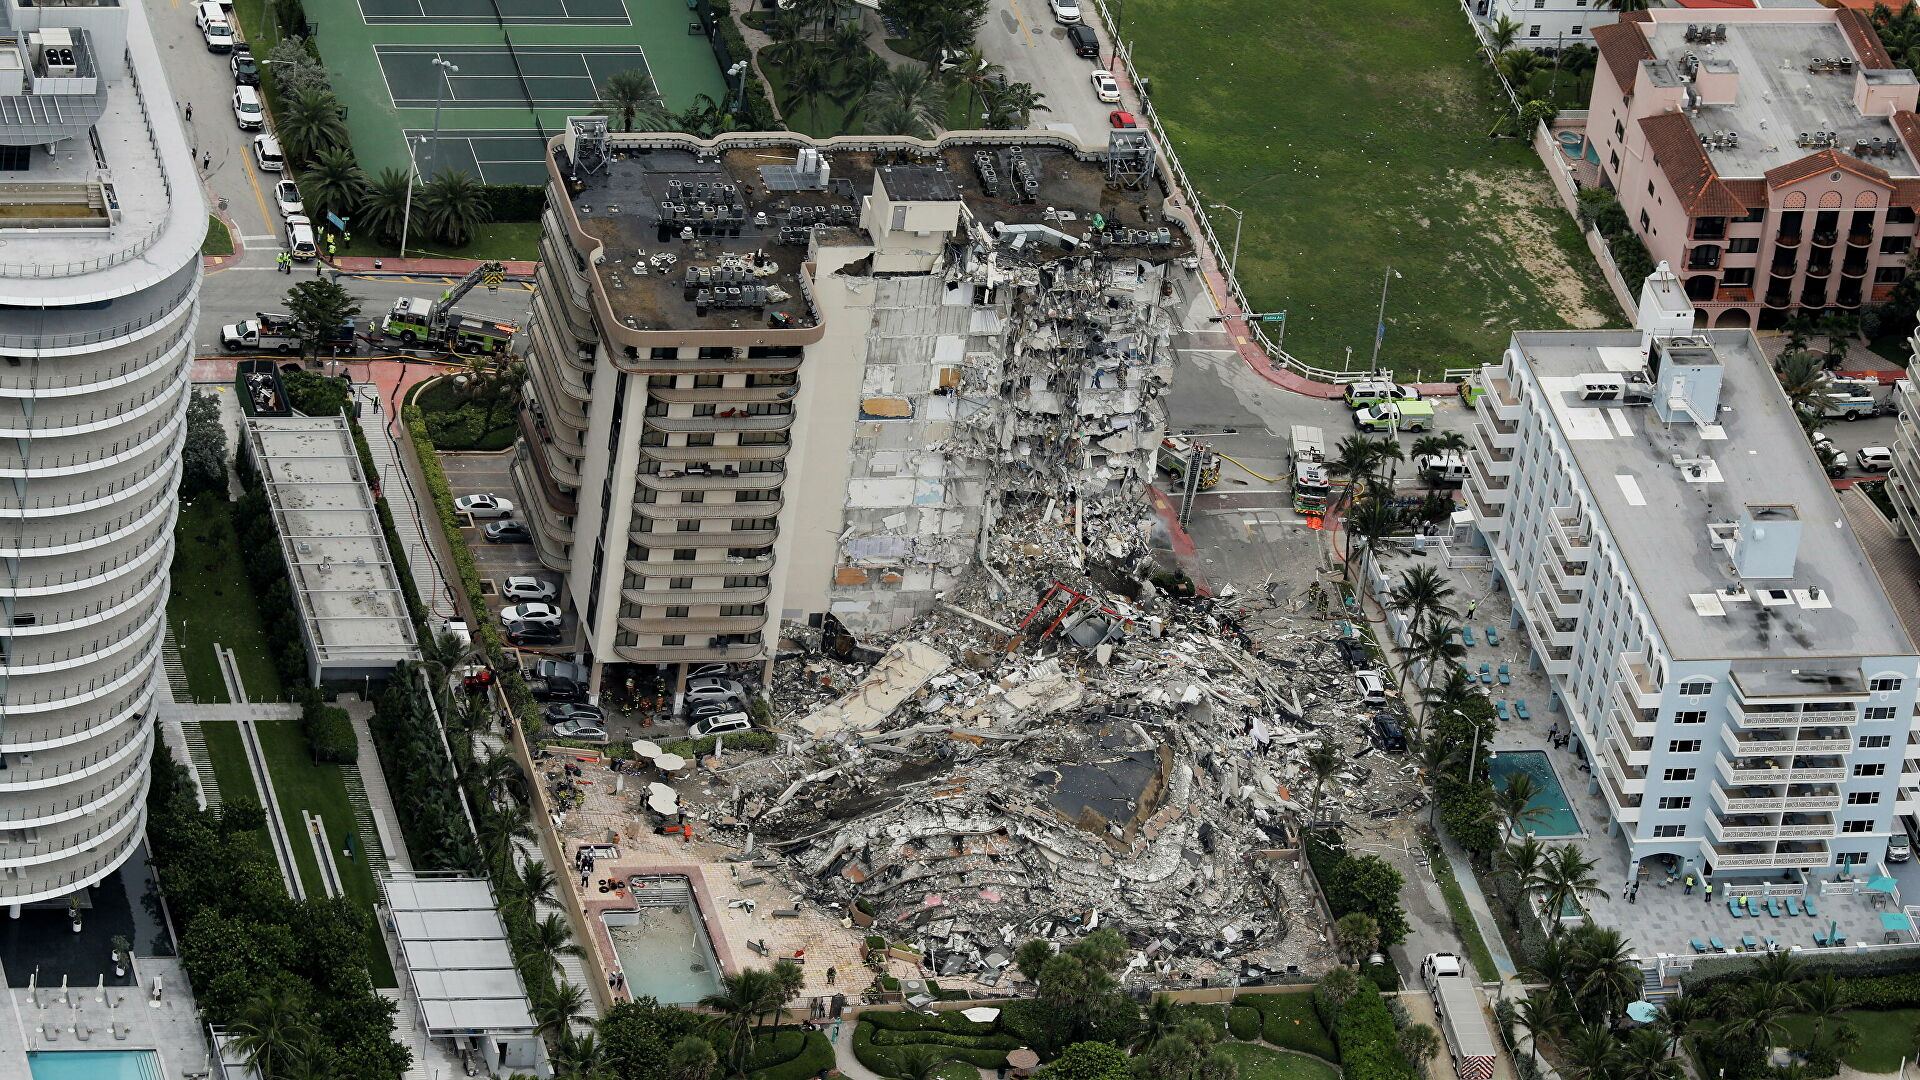 Death toll rises to 36 in Florida building collapse, 109 still missing